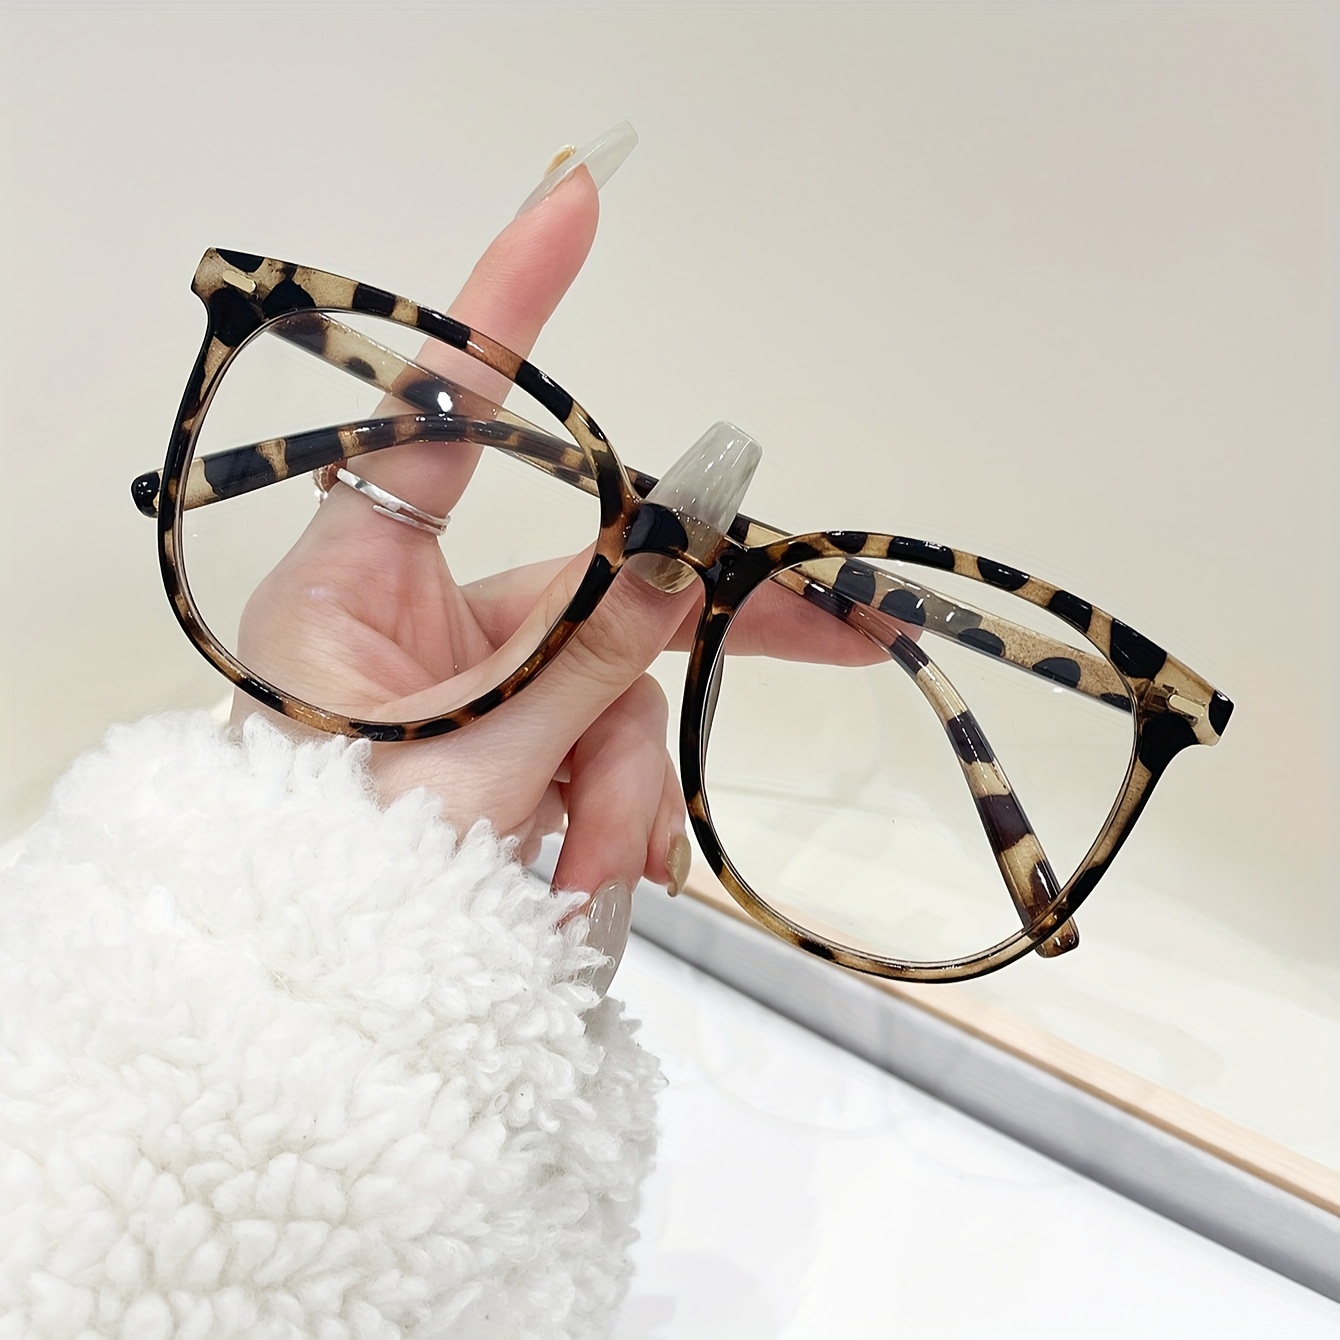 

Oval Frame Clear Lens Glasses Cute Fashion Decorative Glasses Minimalist Spectacles For Women